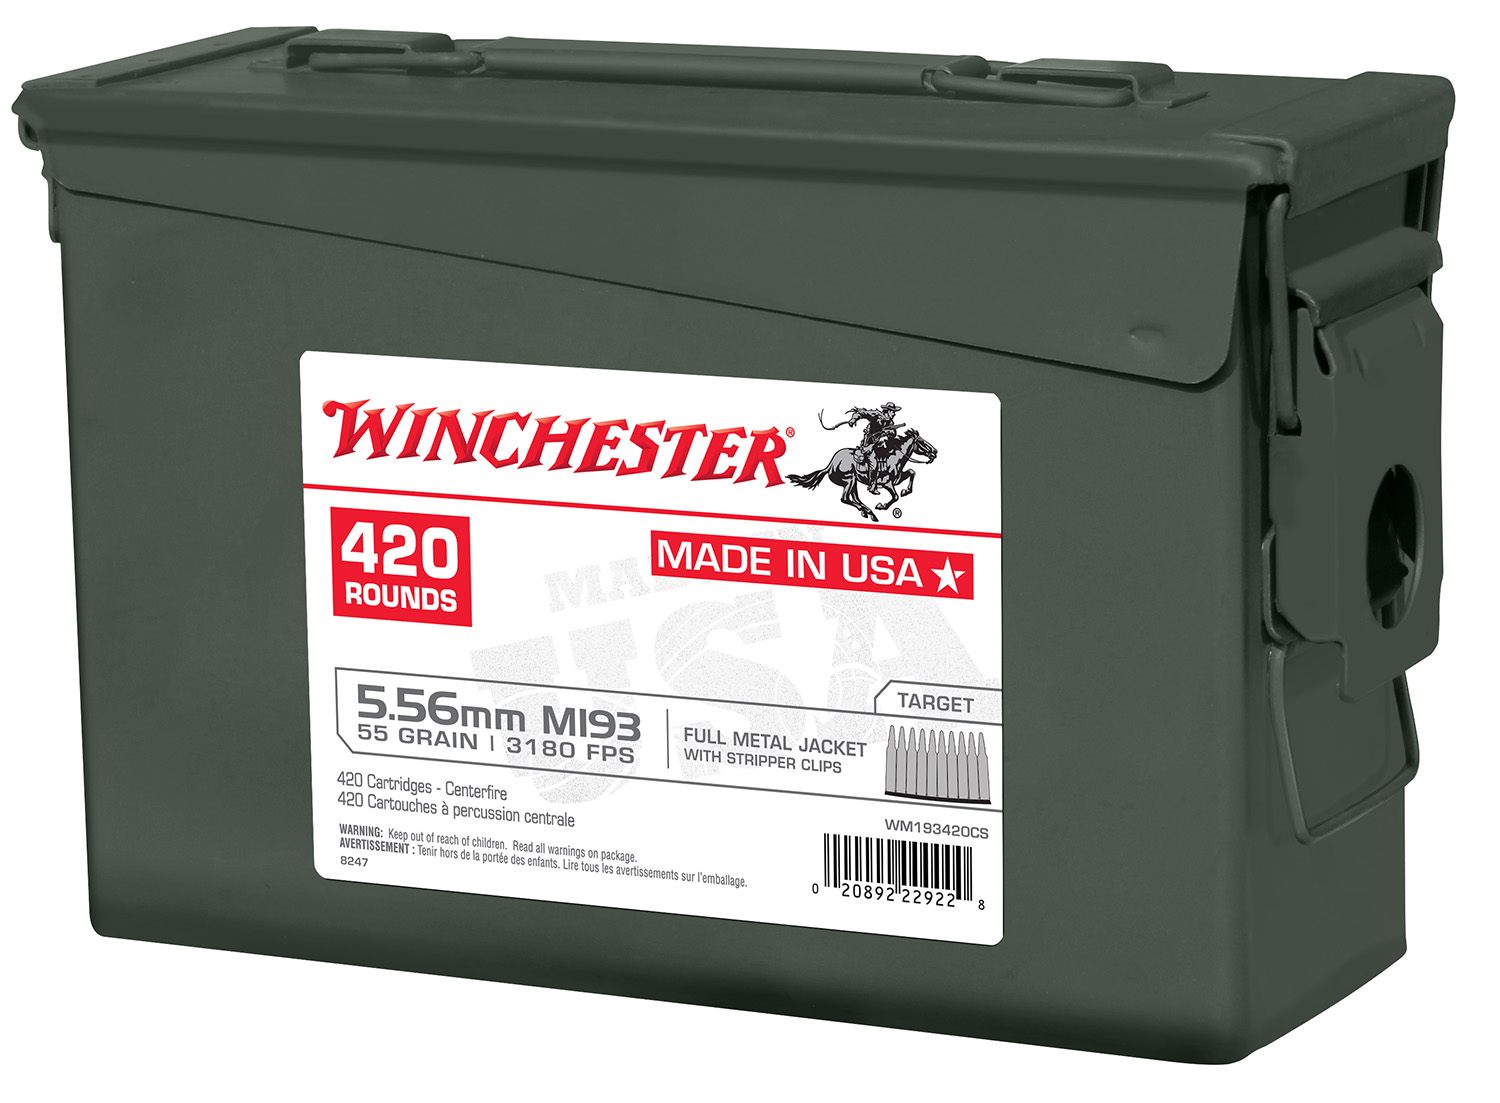 WINCHESTER USA 5.56X45 55GR FMJ 420RD AMMO CAN